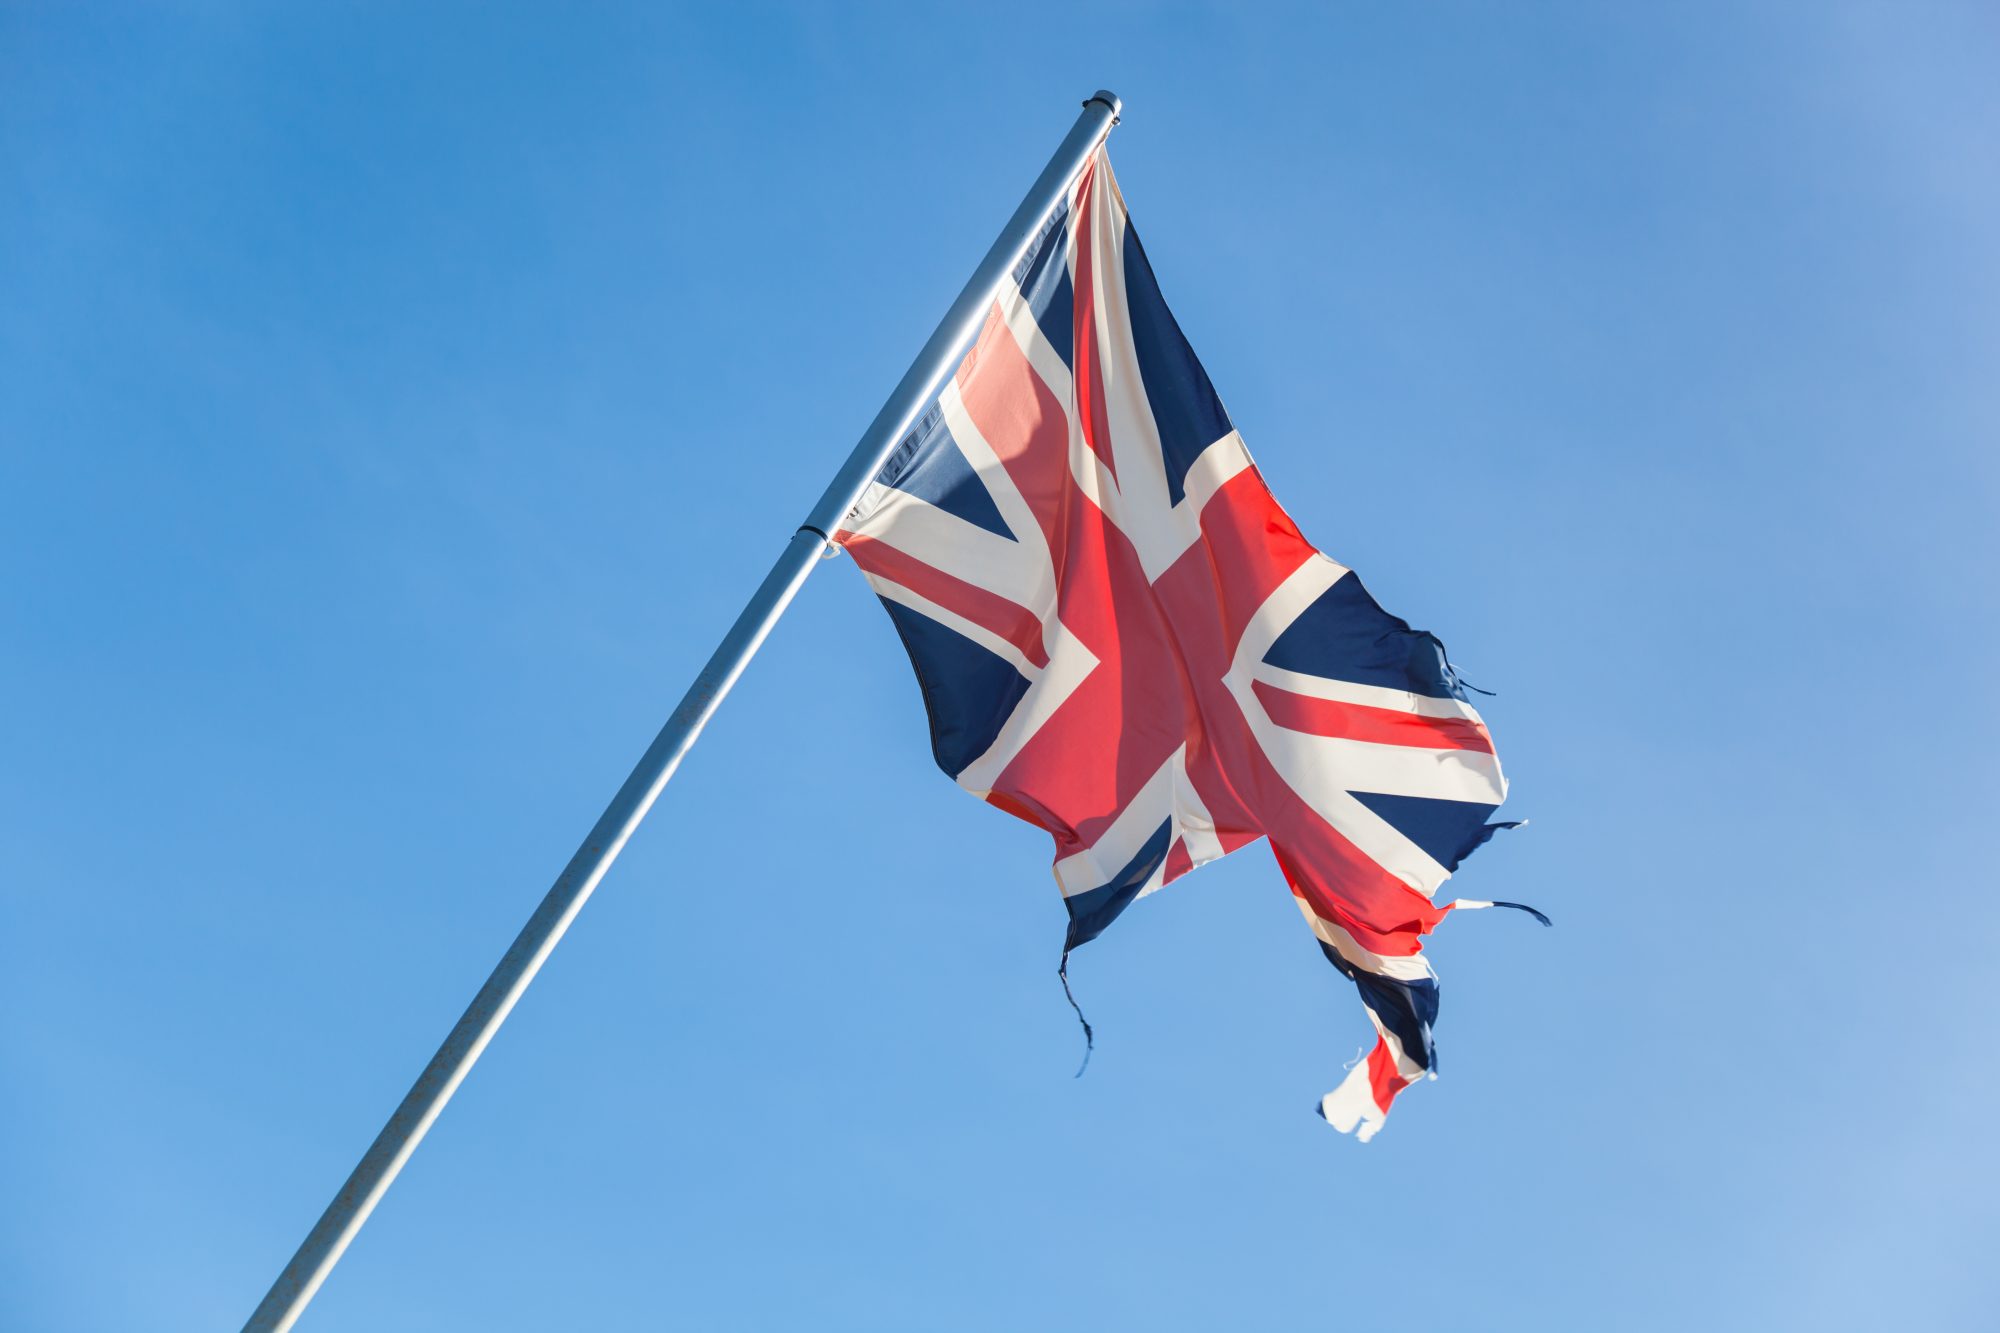 Tattered british flag in front of the blue sky. Concept for separatism or collapse of Great Britain